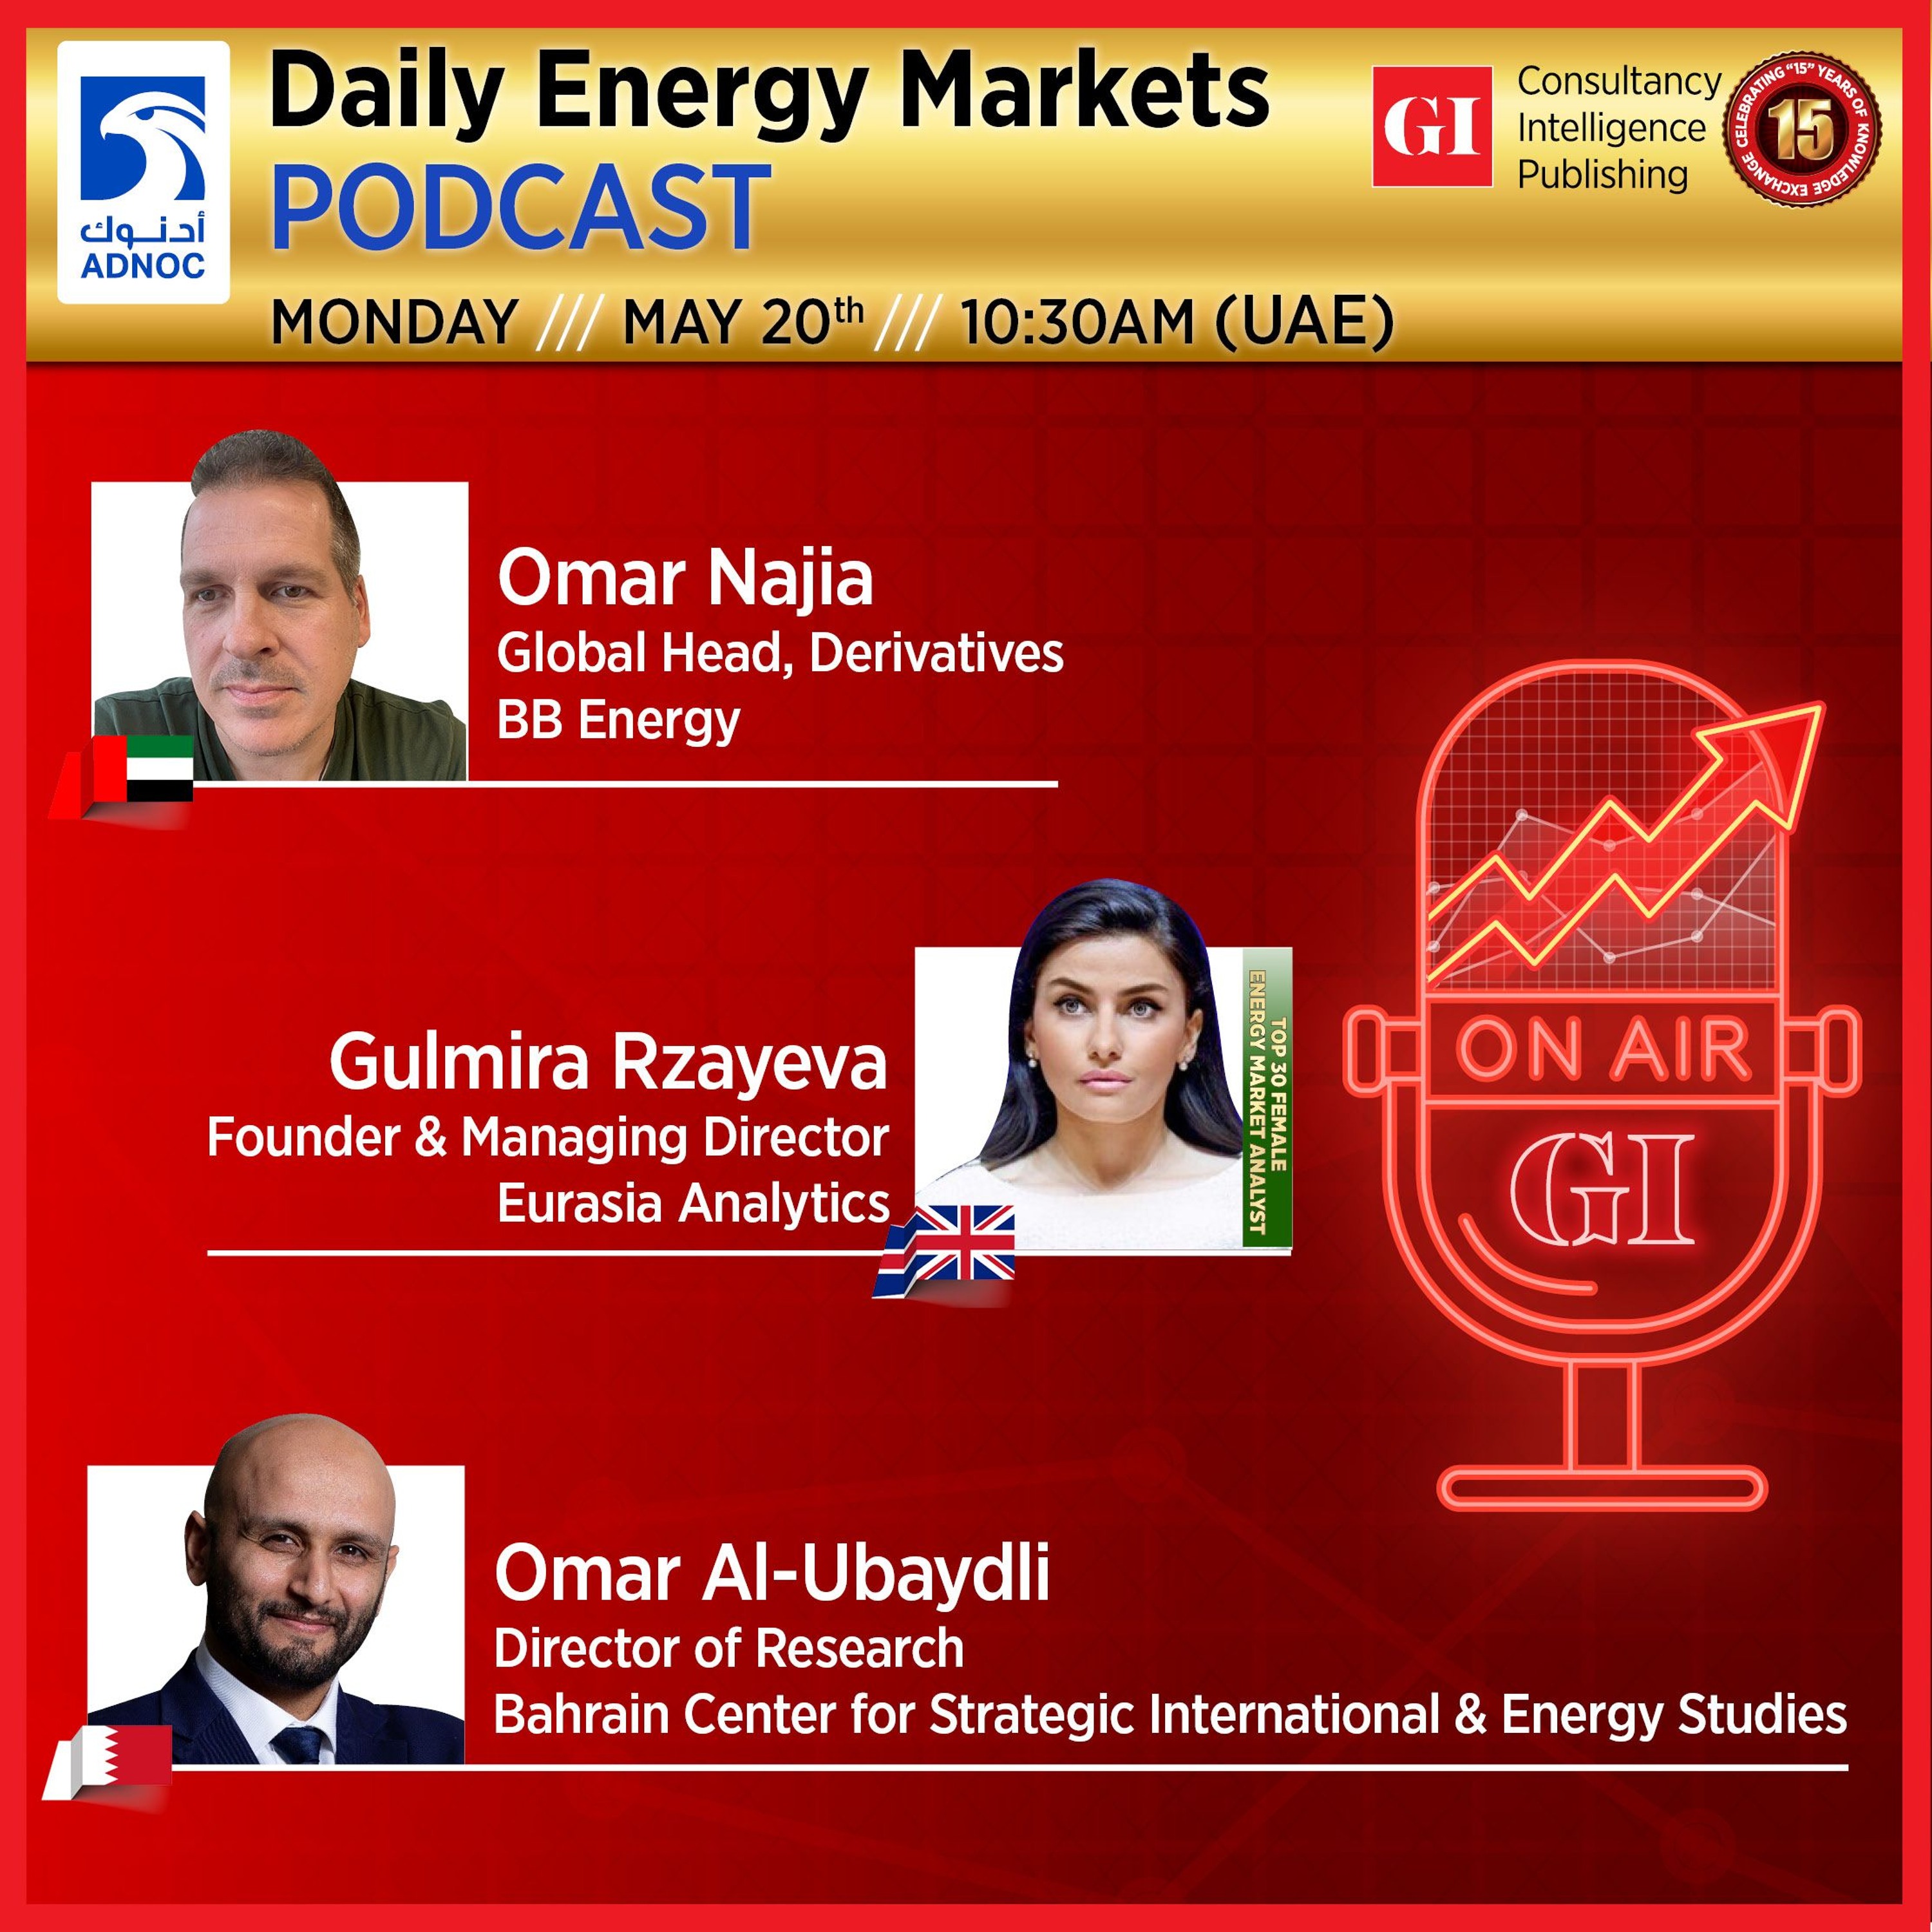 PODCAST: Daily Energy Markets - May 20th